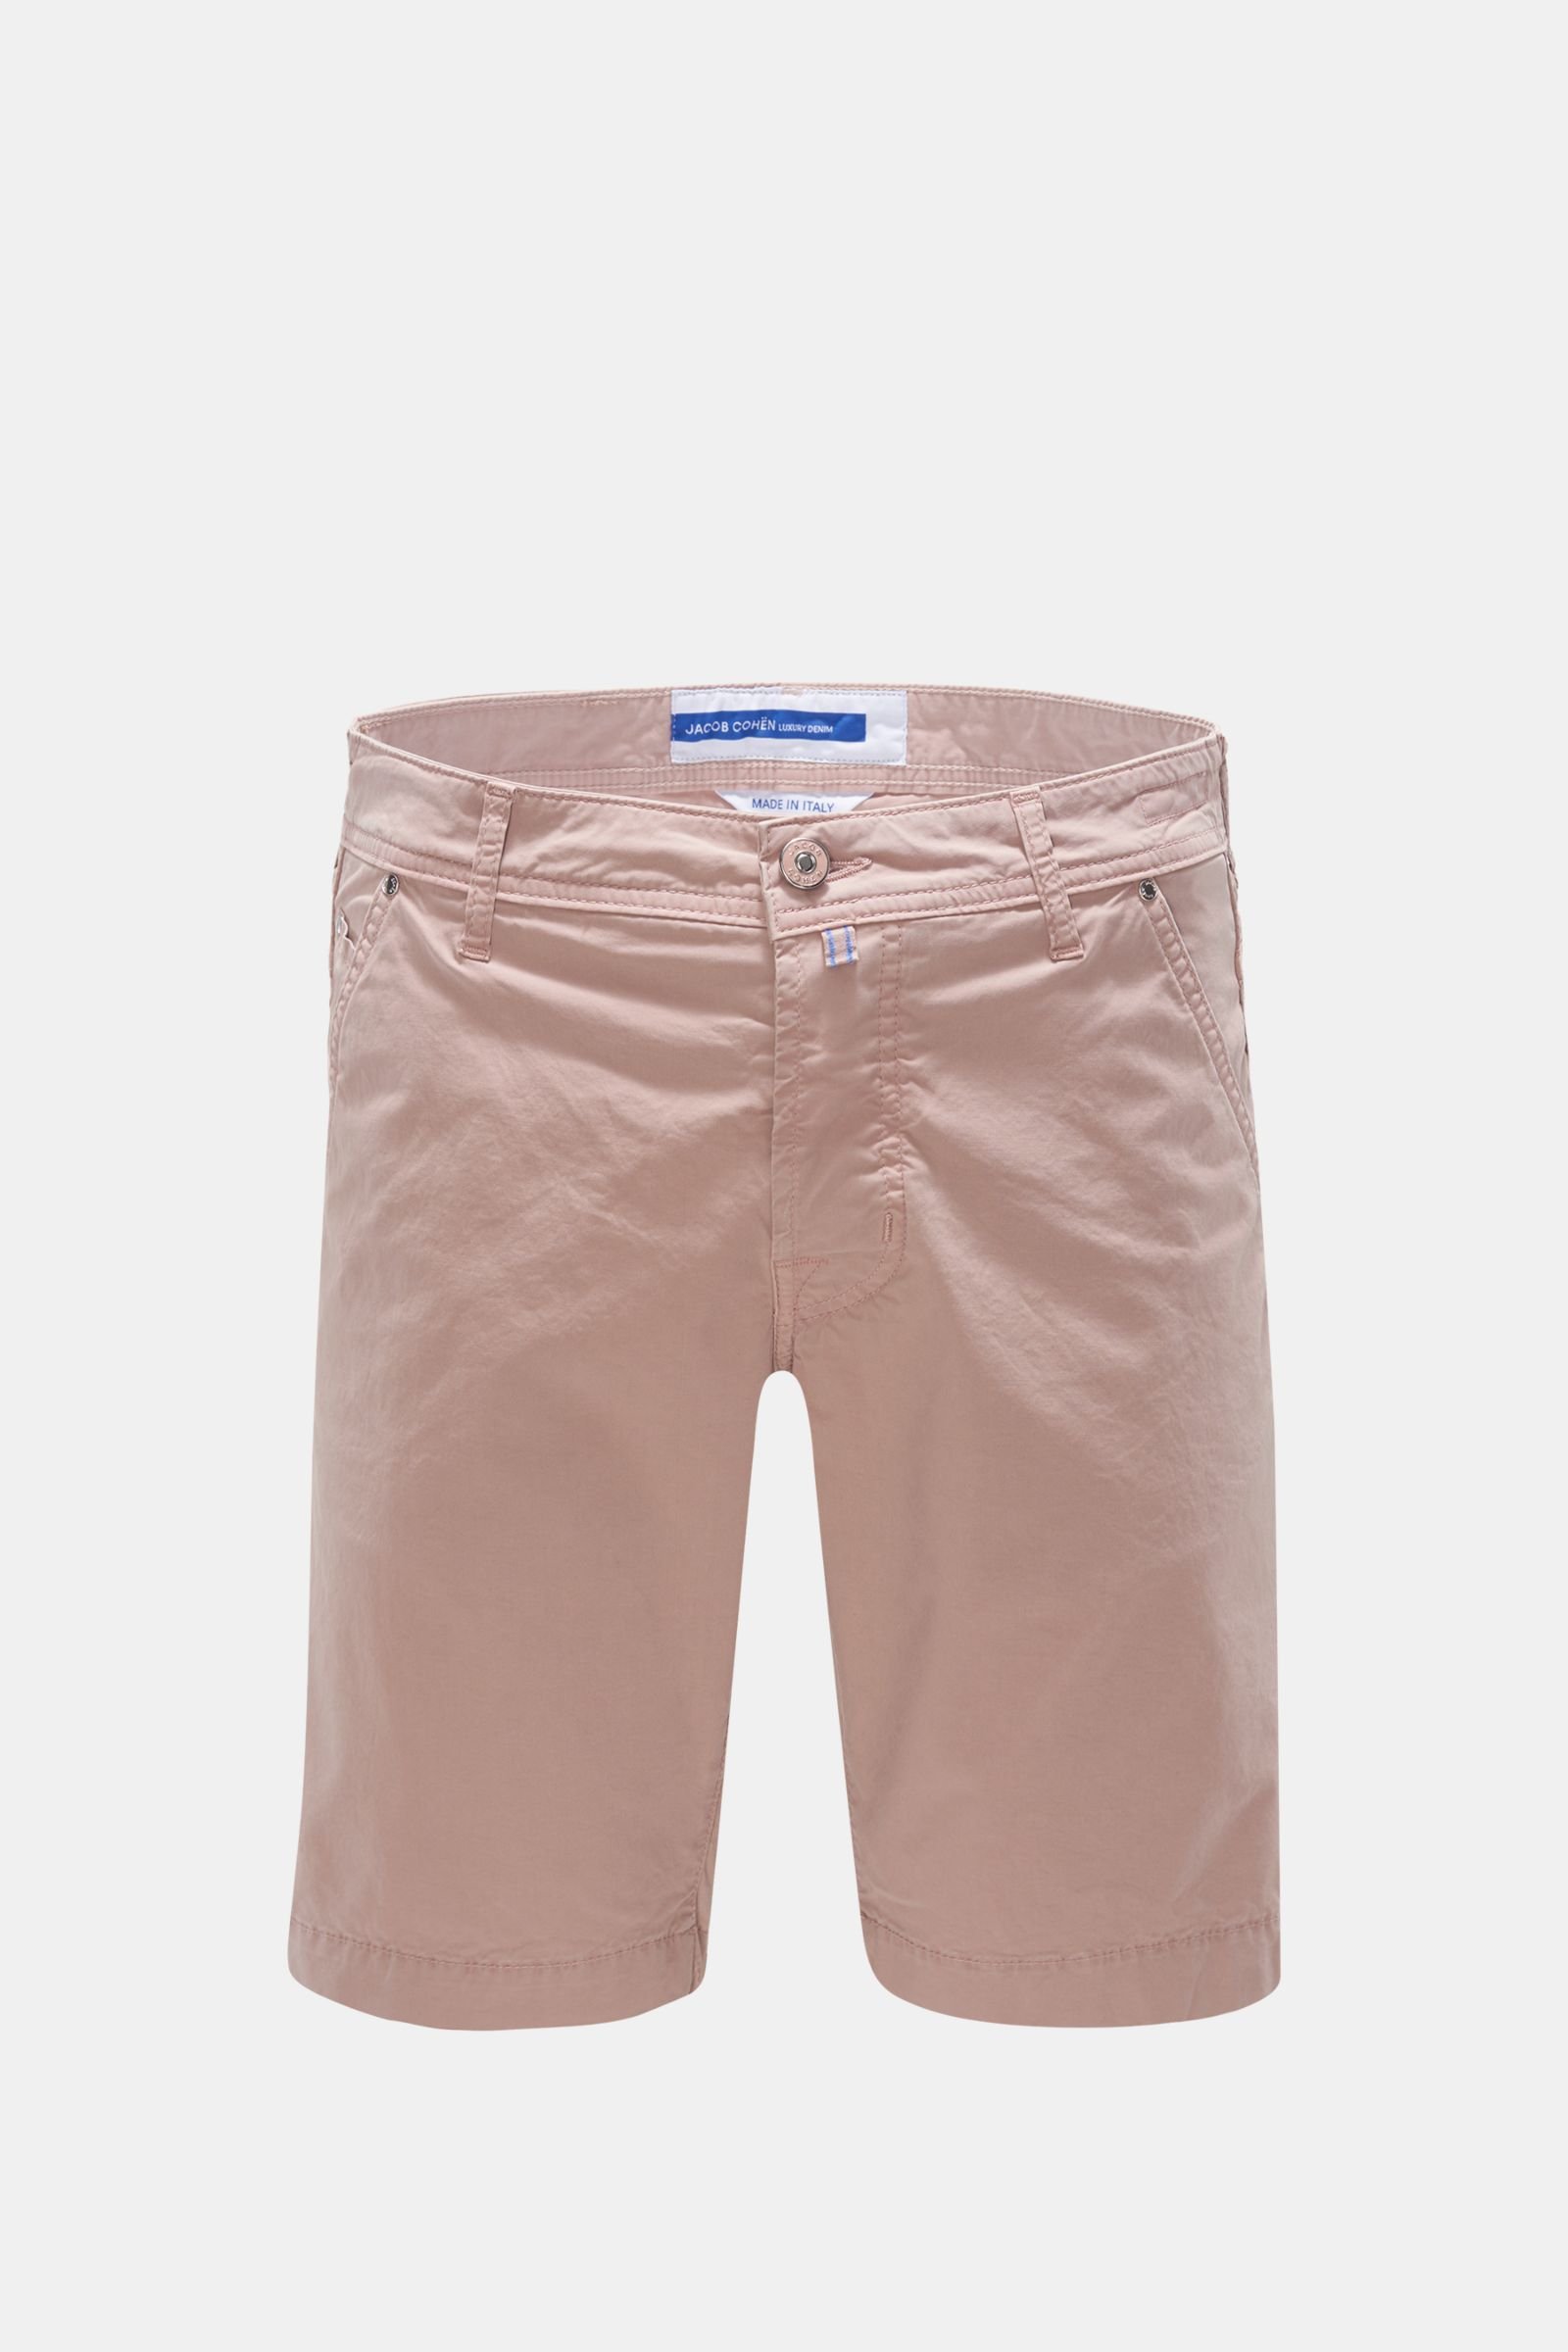 Shorts 'Lou' antique pink (formerly J6613)